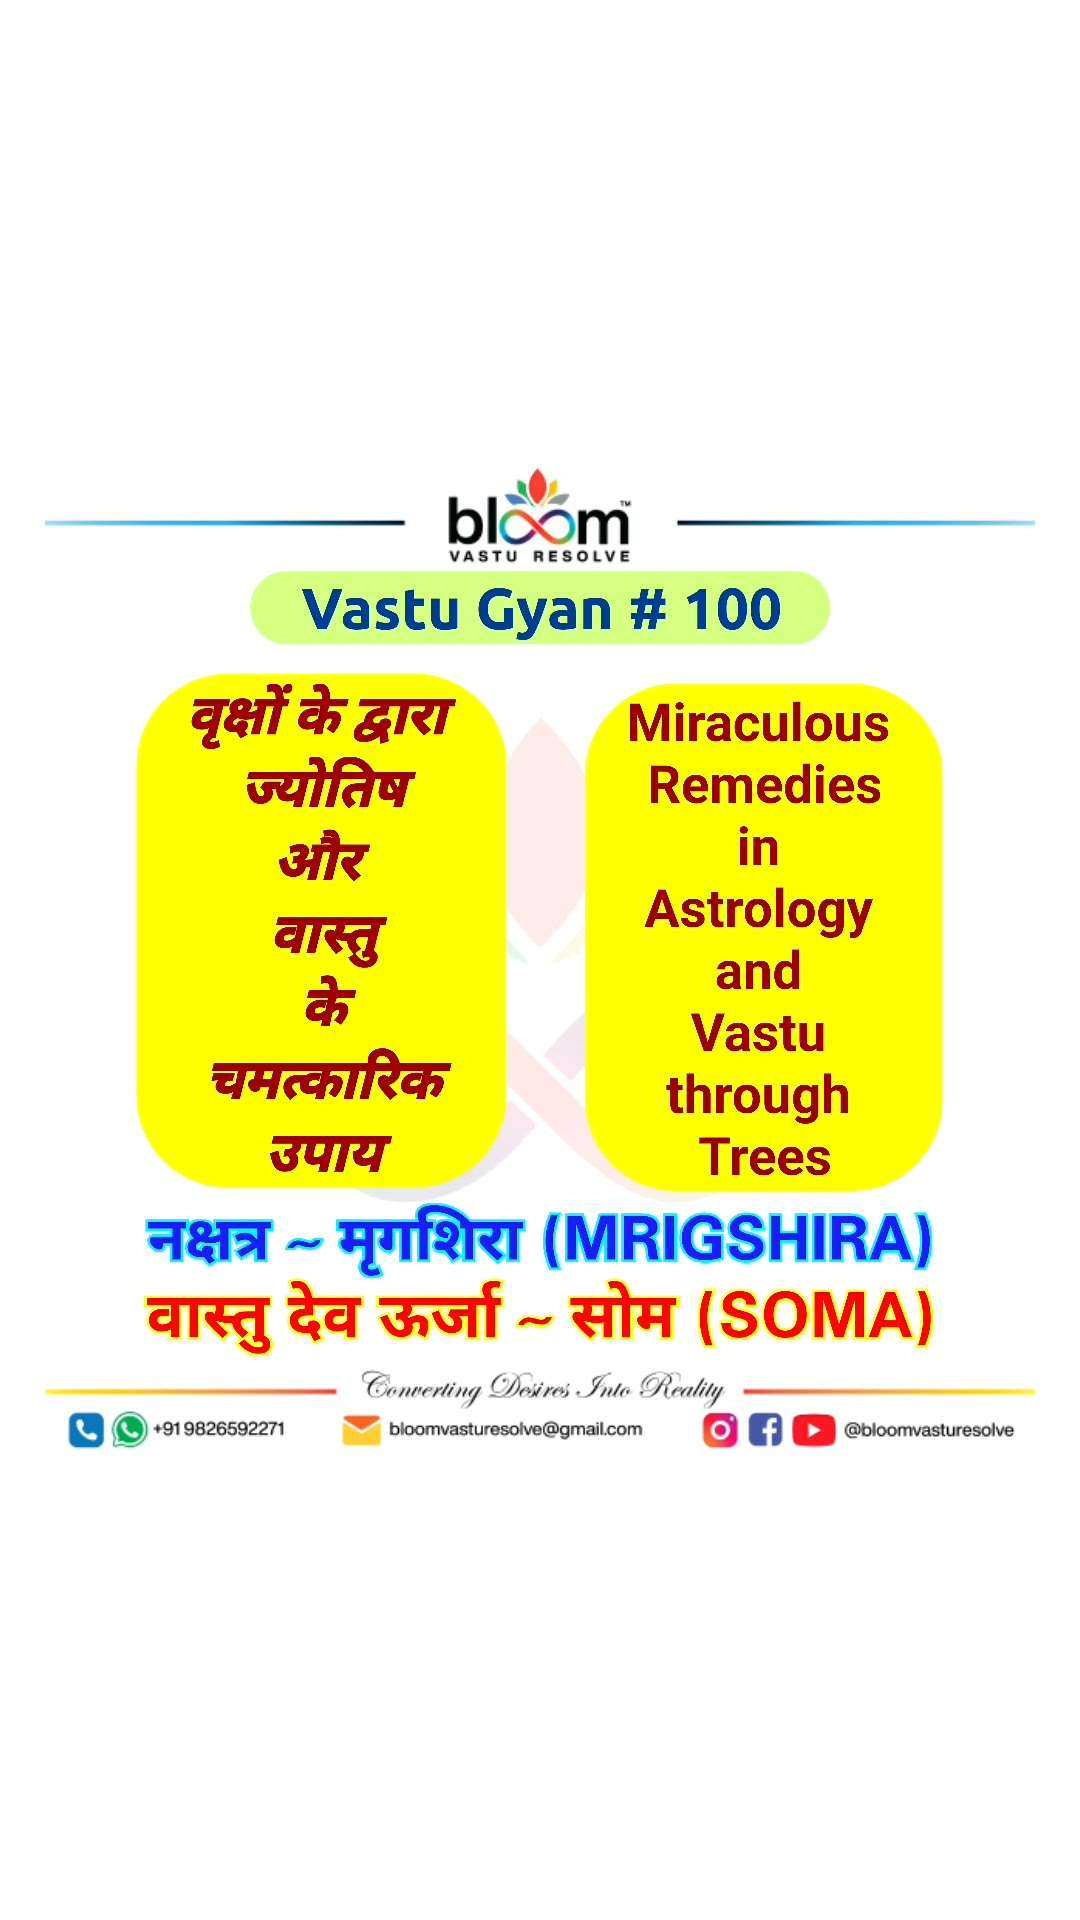 Which Nakshatra tree do you want to know, kindly write in the comment box.

For more Vastu please follow @bloomvasturesolve
on YouTube, Instagram & Facebook
.
.
For personal consultation, feel free to contact certified MahaVastu Expert through
M - 9826592271
Or
bloomvasturesolve@gmail.com

#vastu 
#mahavastu 
#mahavastuexpert
#bloomvasturesolve
#BirthConstellationTree
#vasturemedies
#astrovastu
#astrology
#DivineEnergyRemedy
#Sacredtree
#mrigshira
#som
#खेर
#cutch_tree
#acacia_catechu